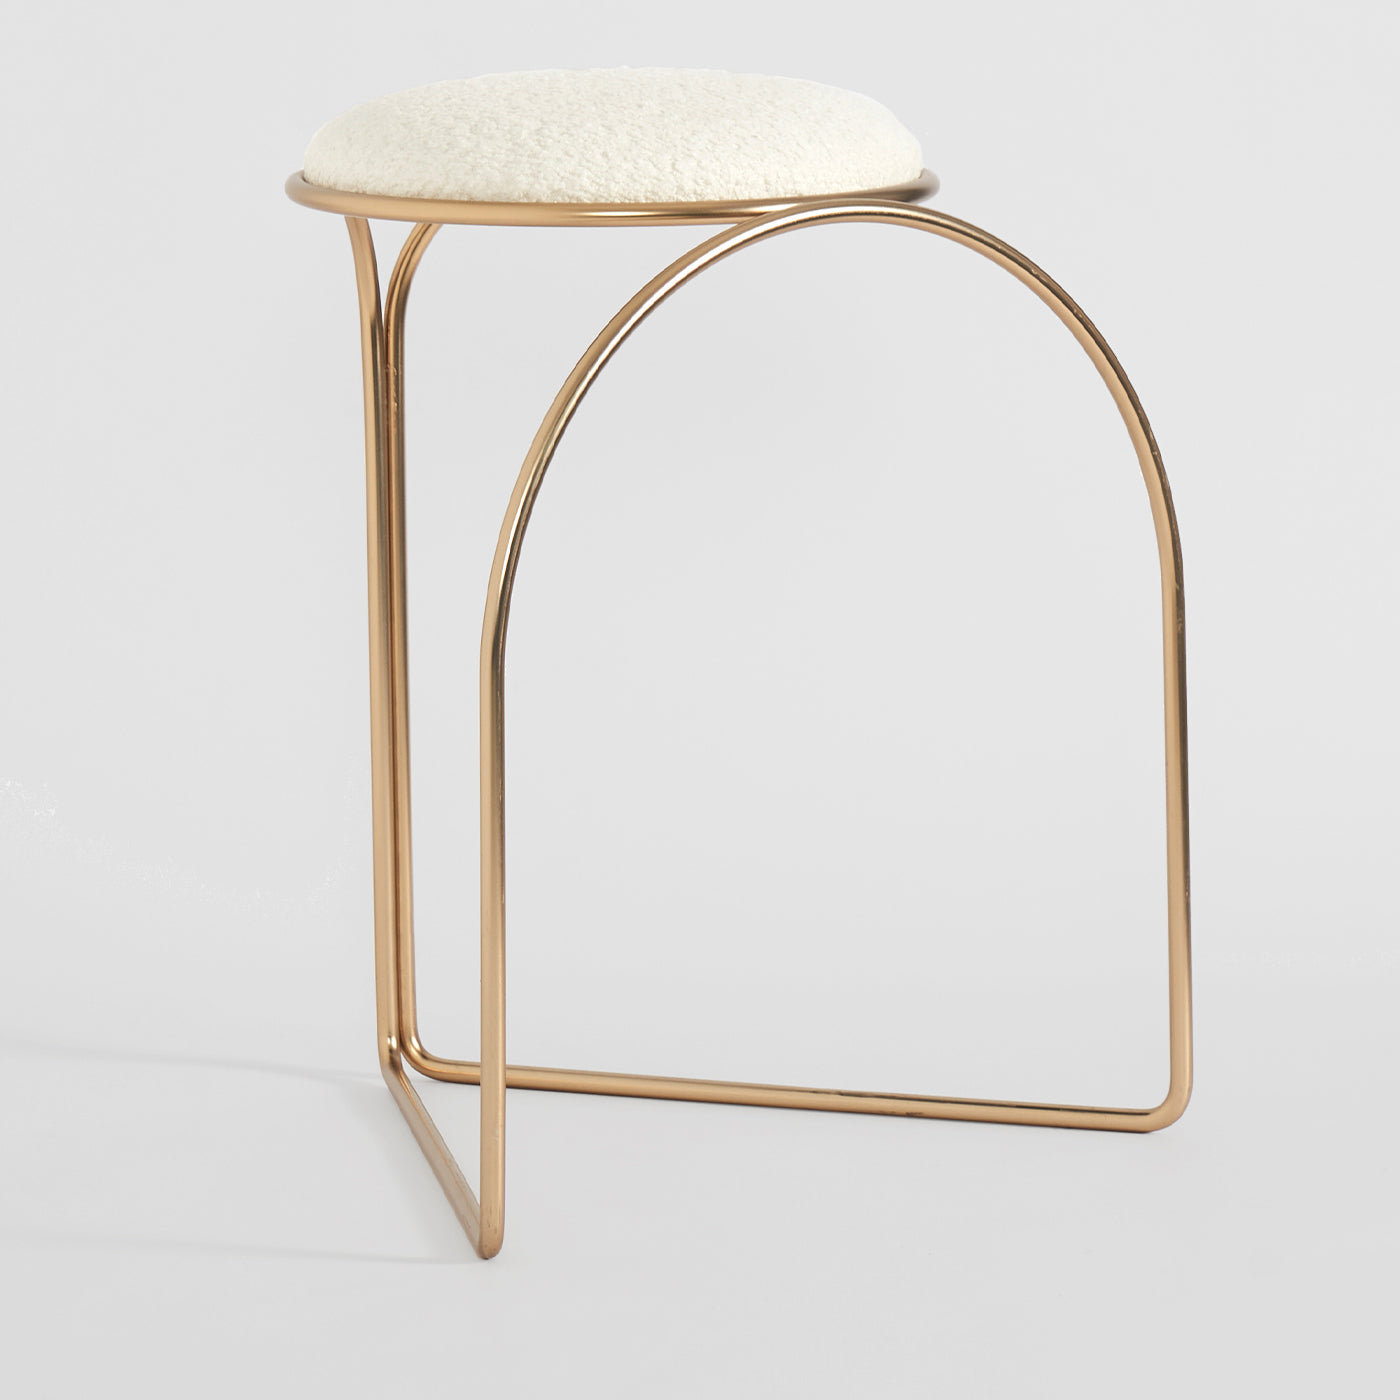 FLOW SCULPTURAL GOLD AND WHITE LOW STOOL - Alternative view 1